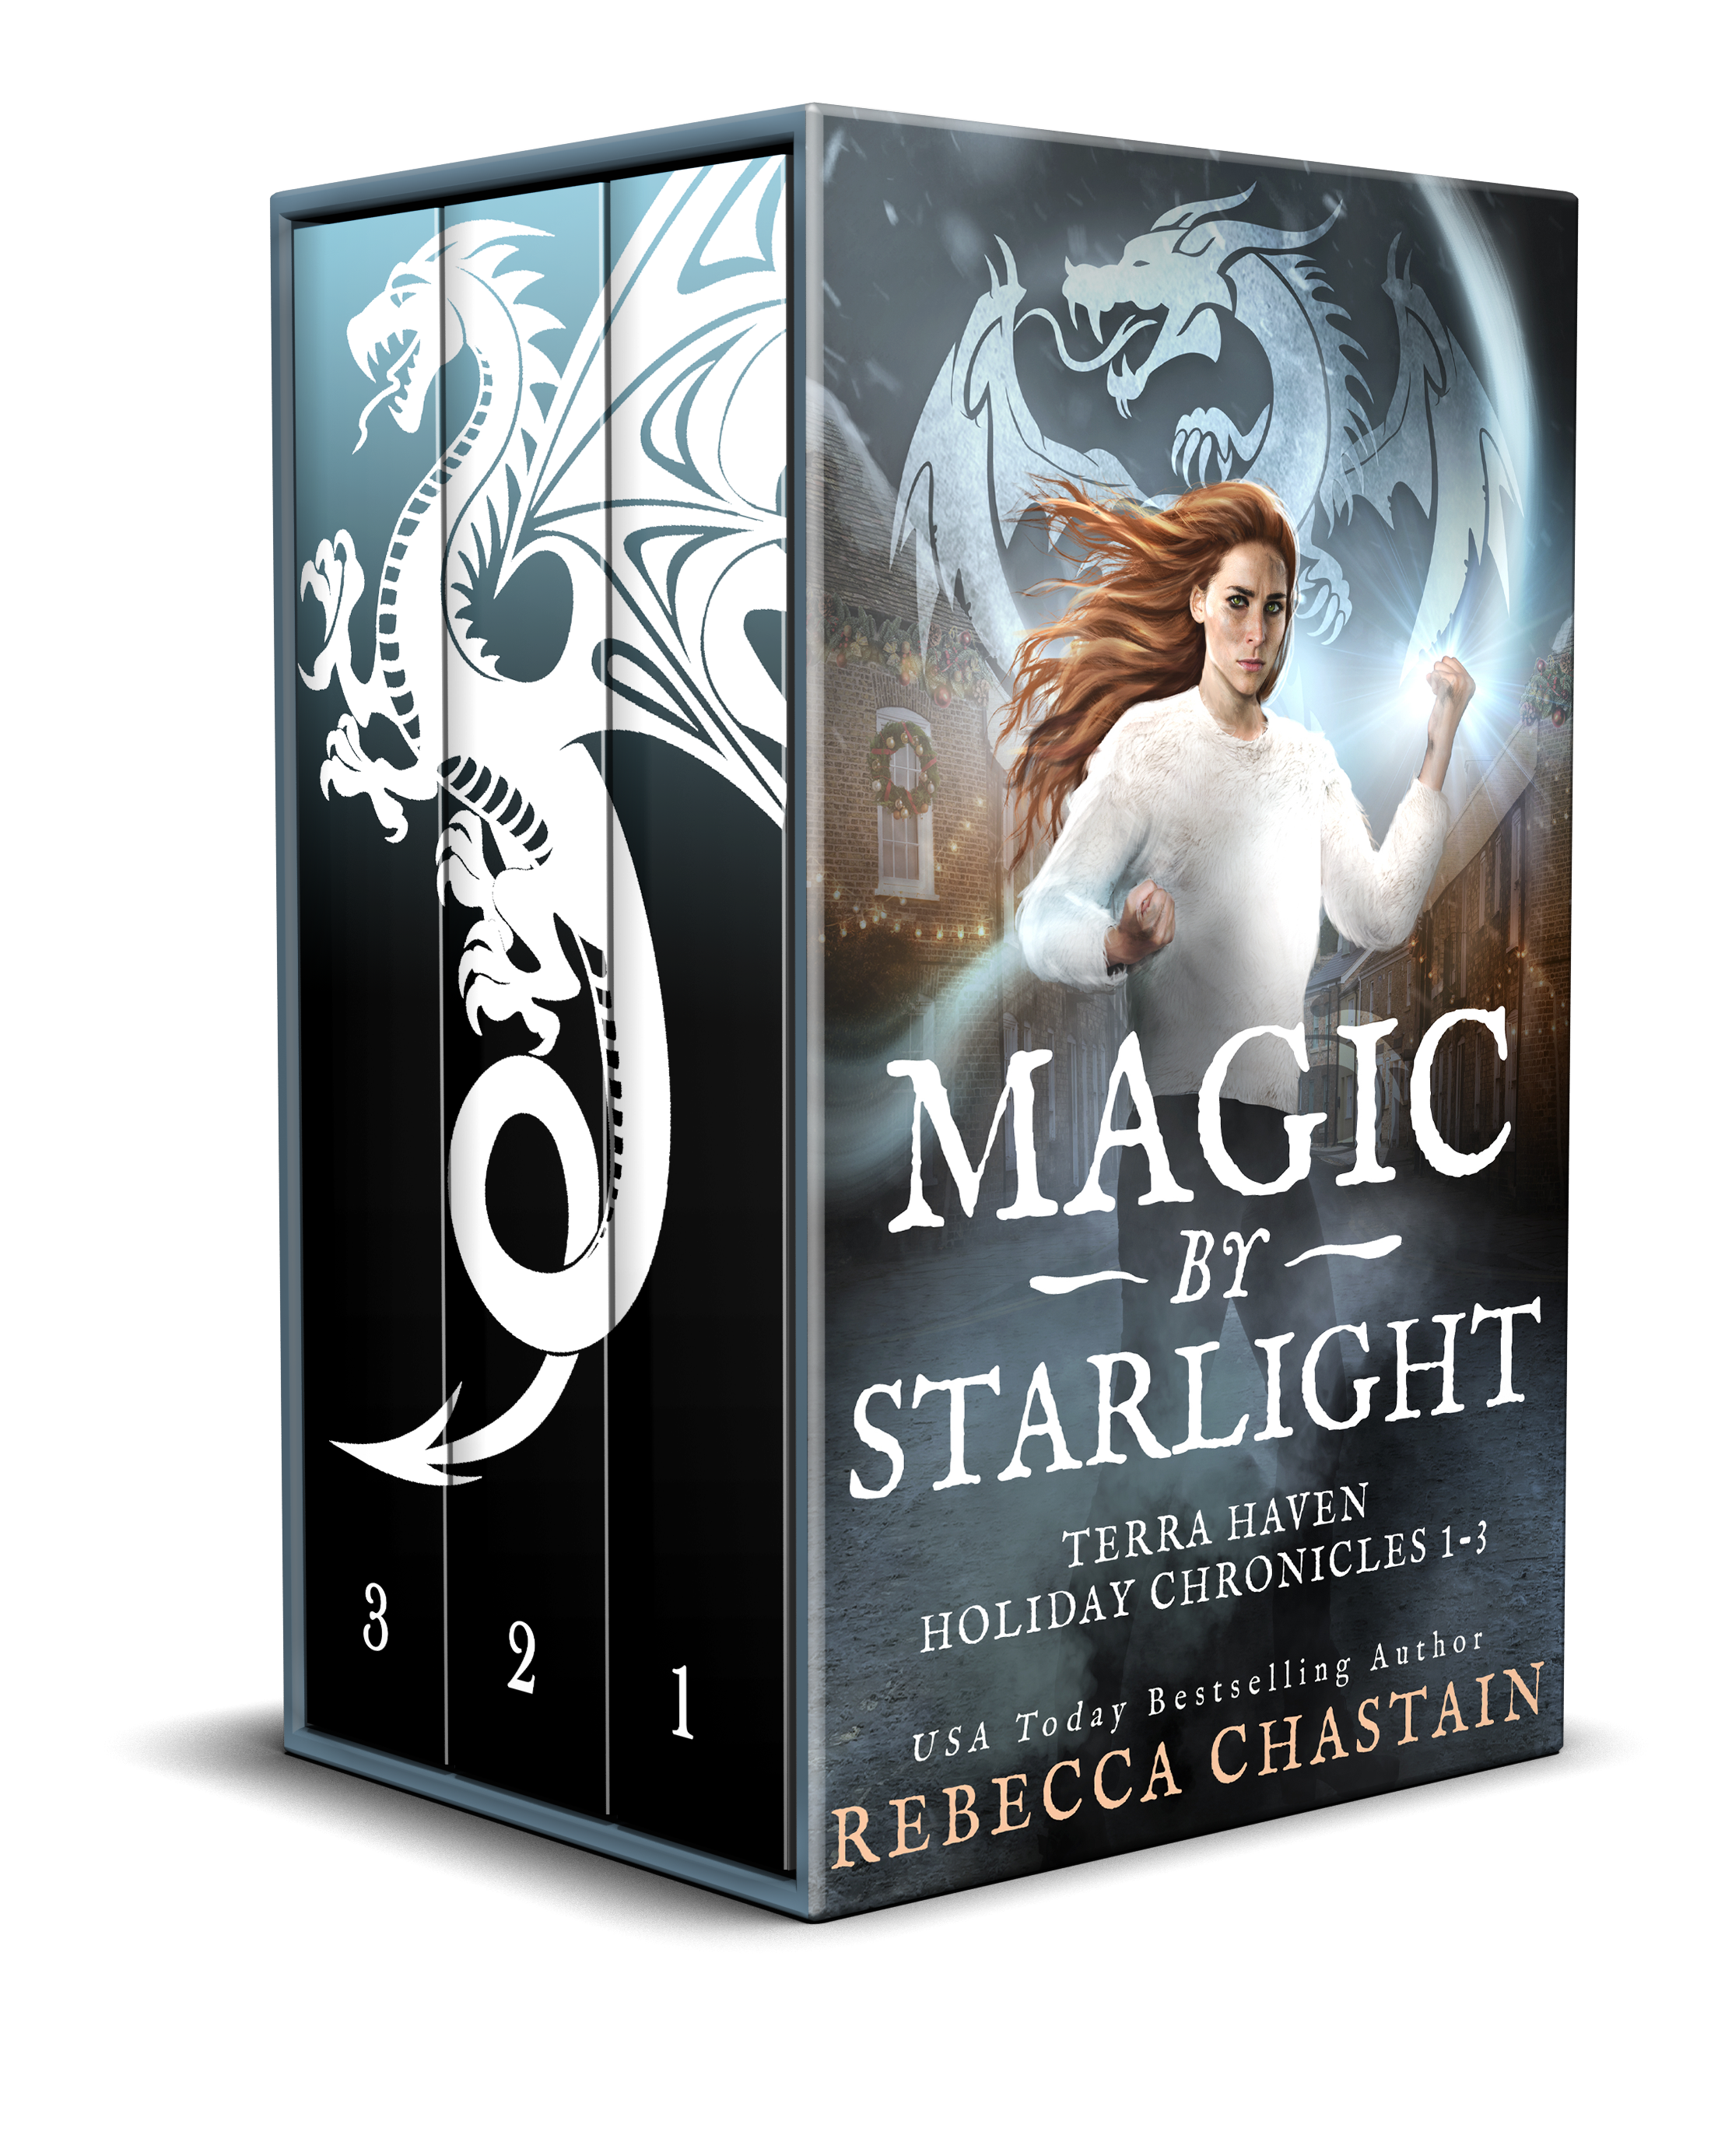 Magic by Starlight, Terra Haven Holiday Chronicles 3-book Box Set